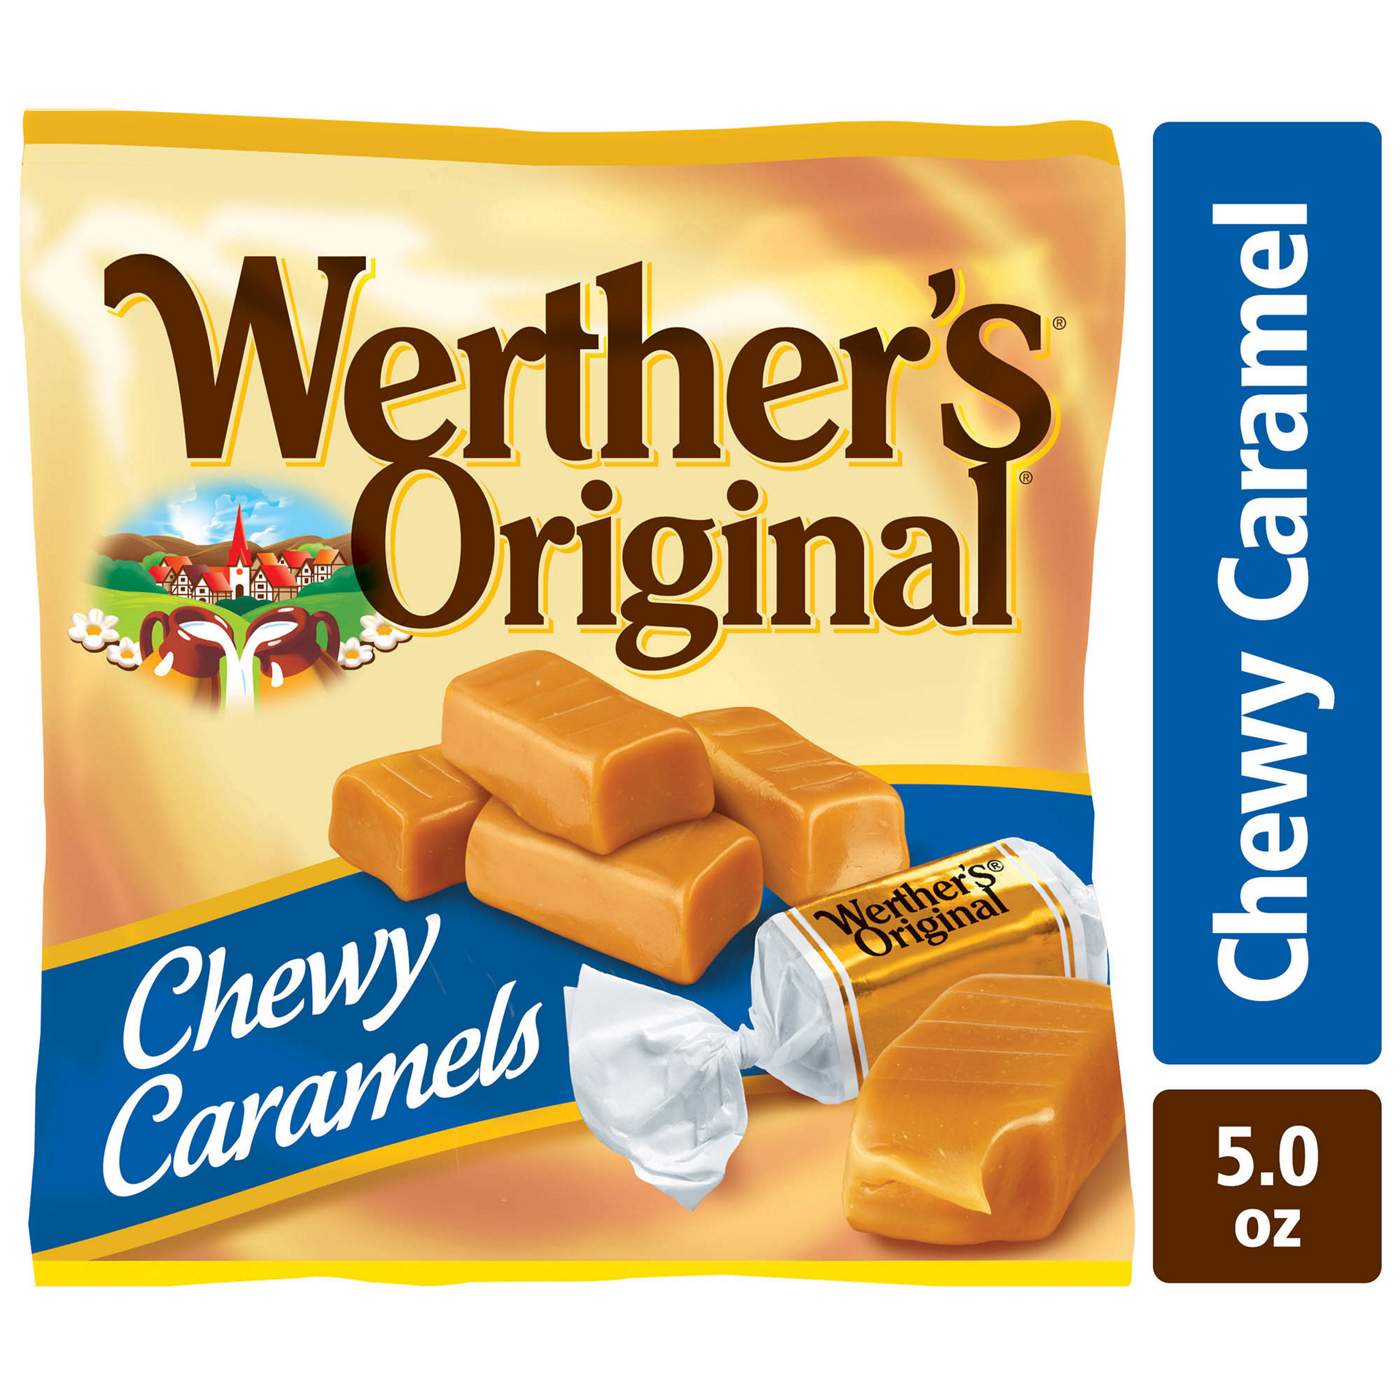 Werther's Original Chewy Caramel Candy; image 4 of 6